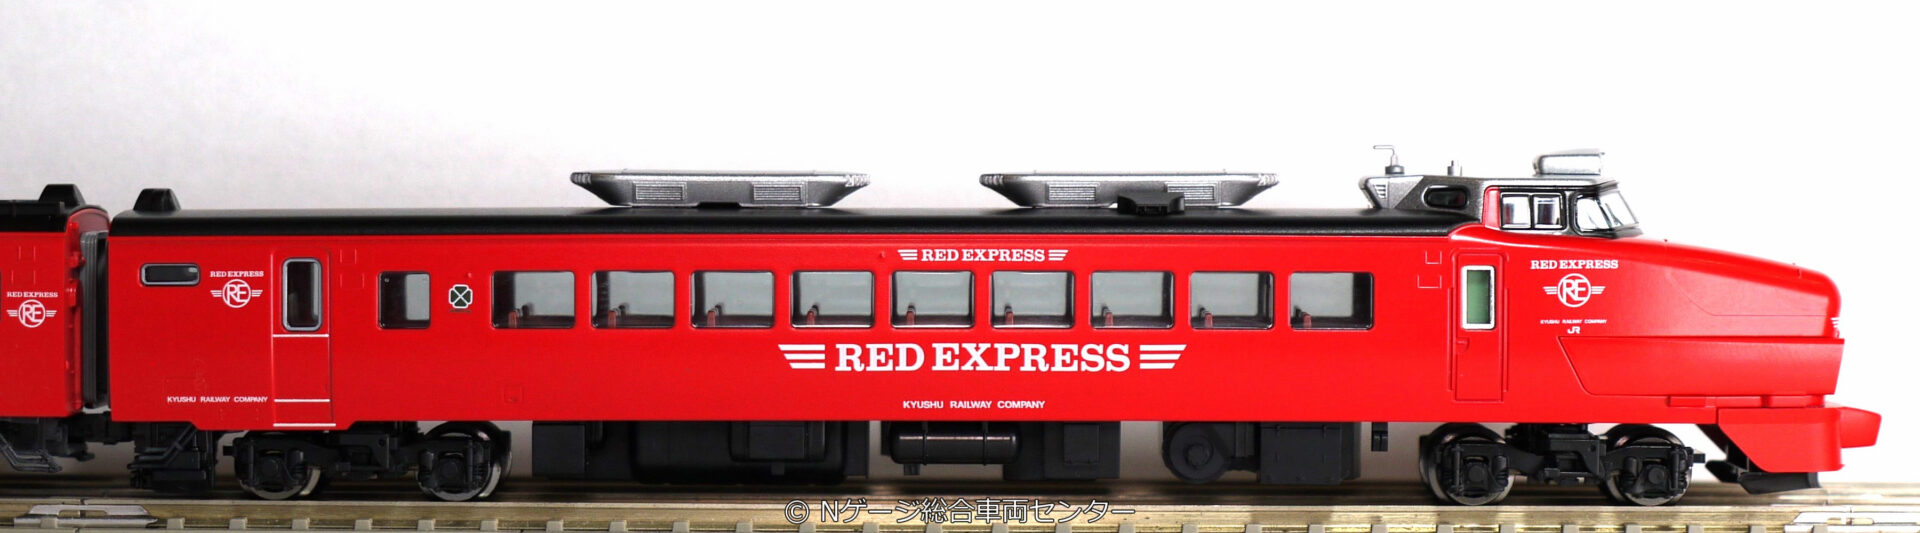 TOMIX 485系 RED EXPRESS（両ボンネット クロ481-100） 6両編成 開封